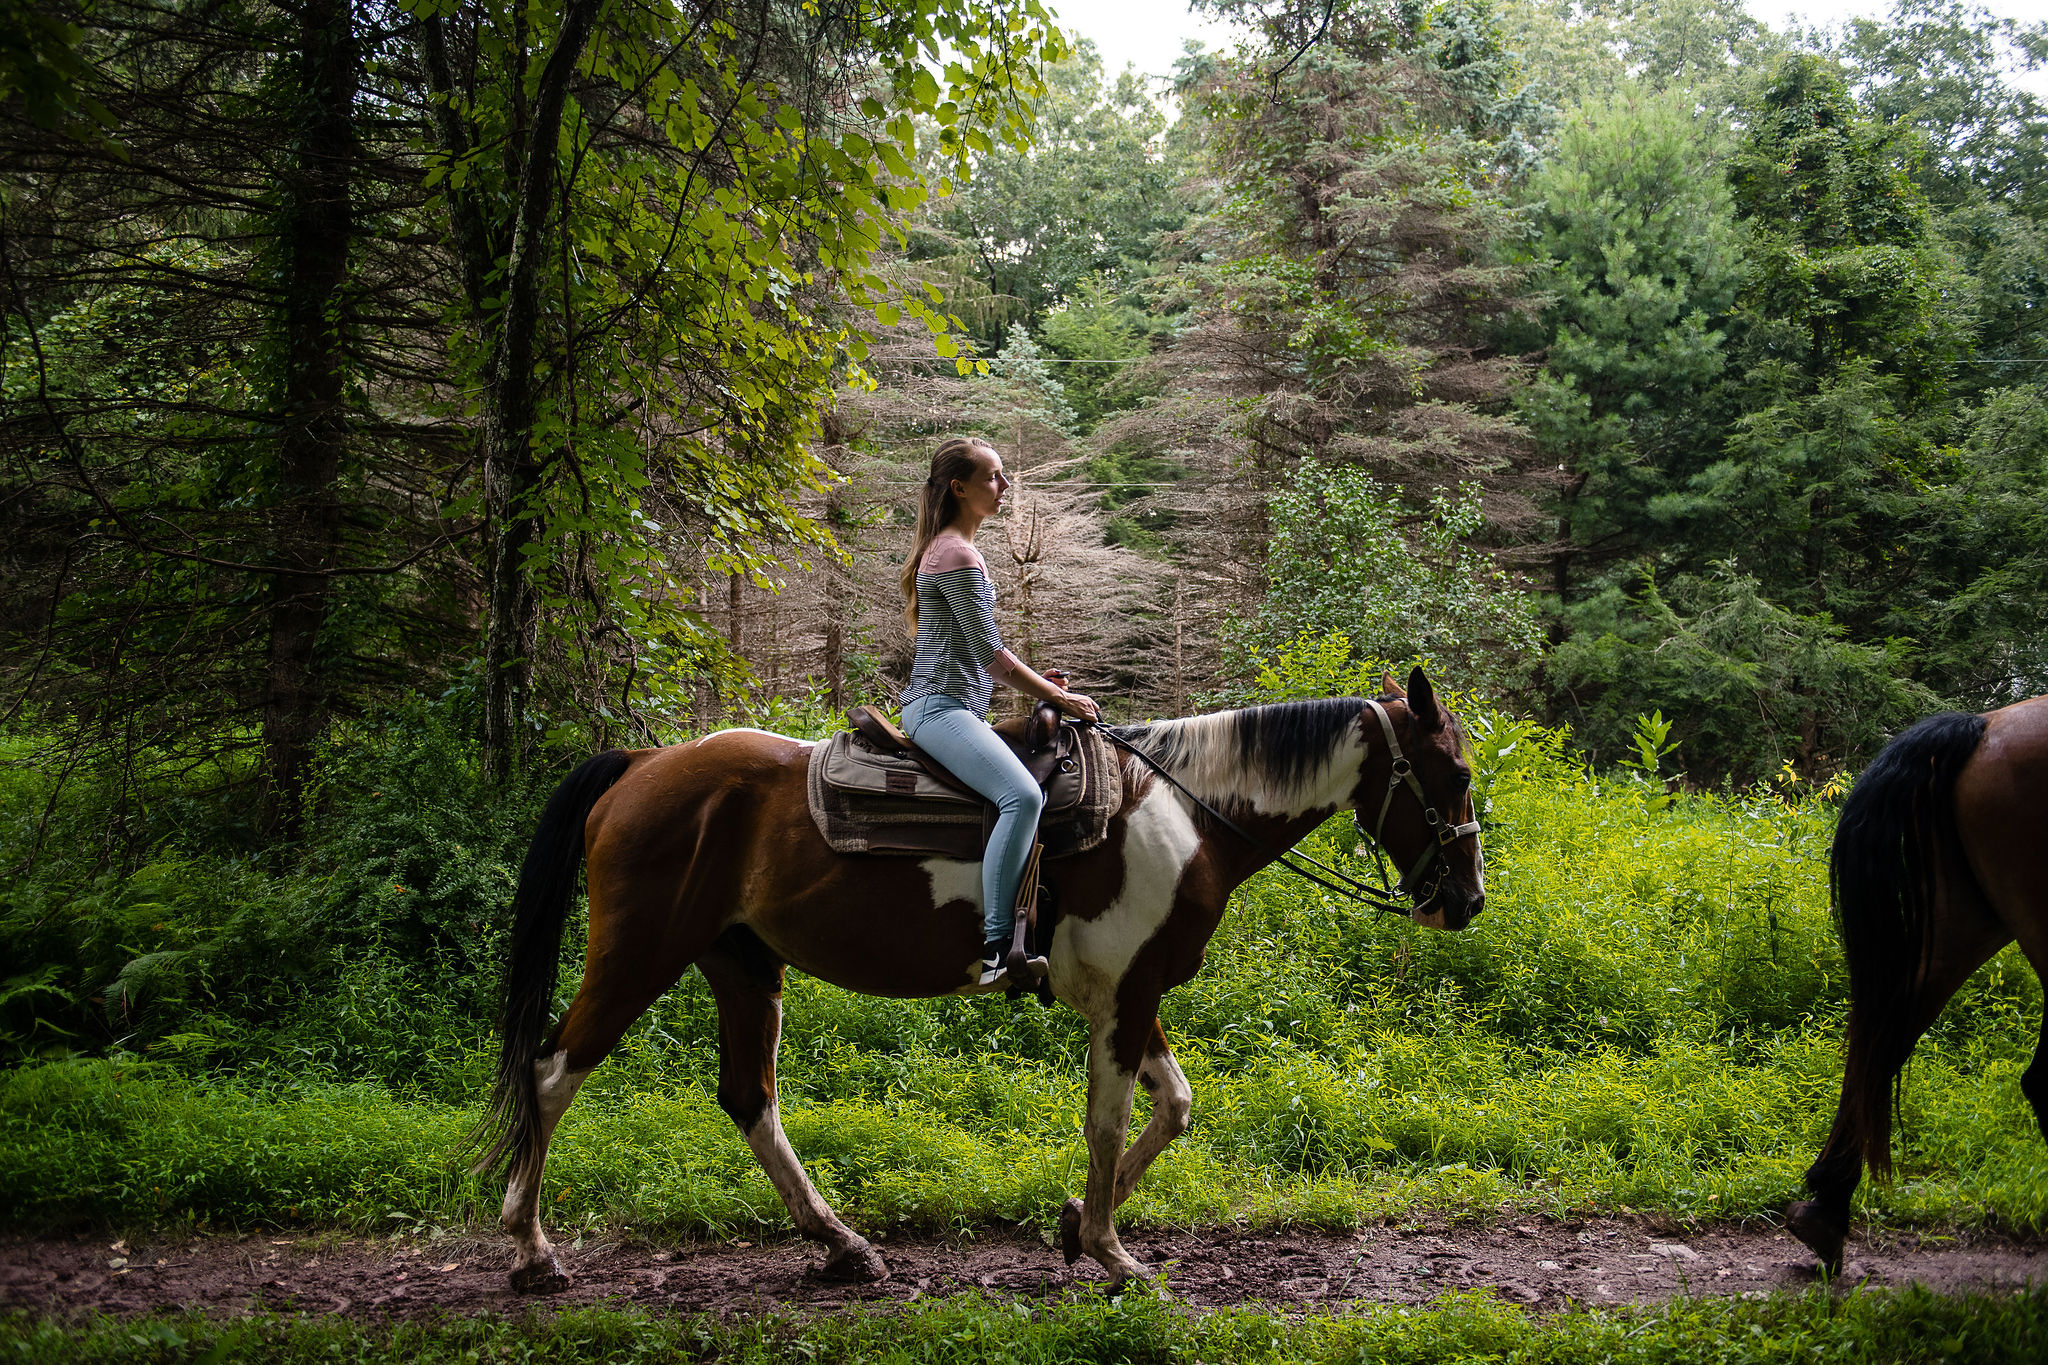 Woman on Horseback Trail Ride in Woods during Springtime